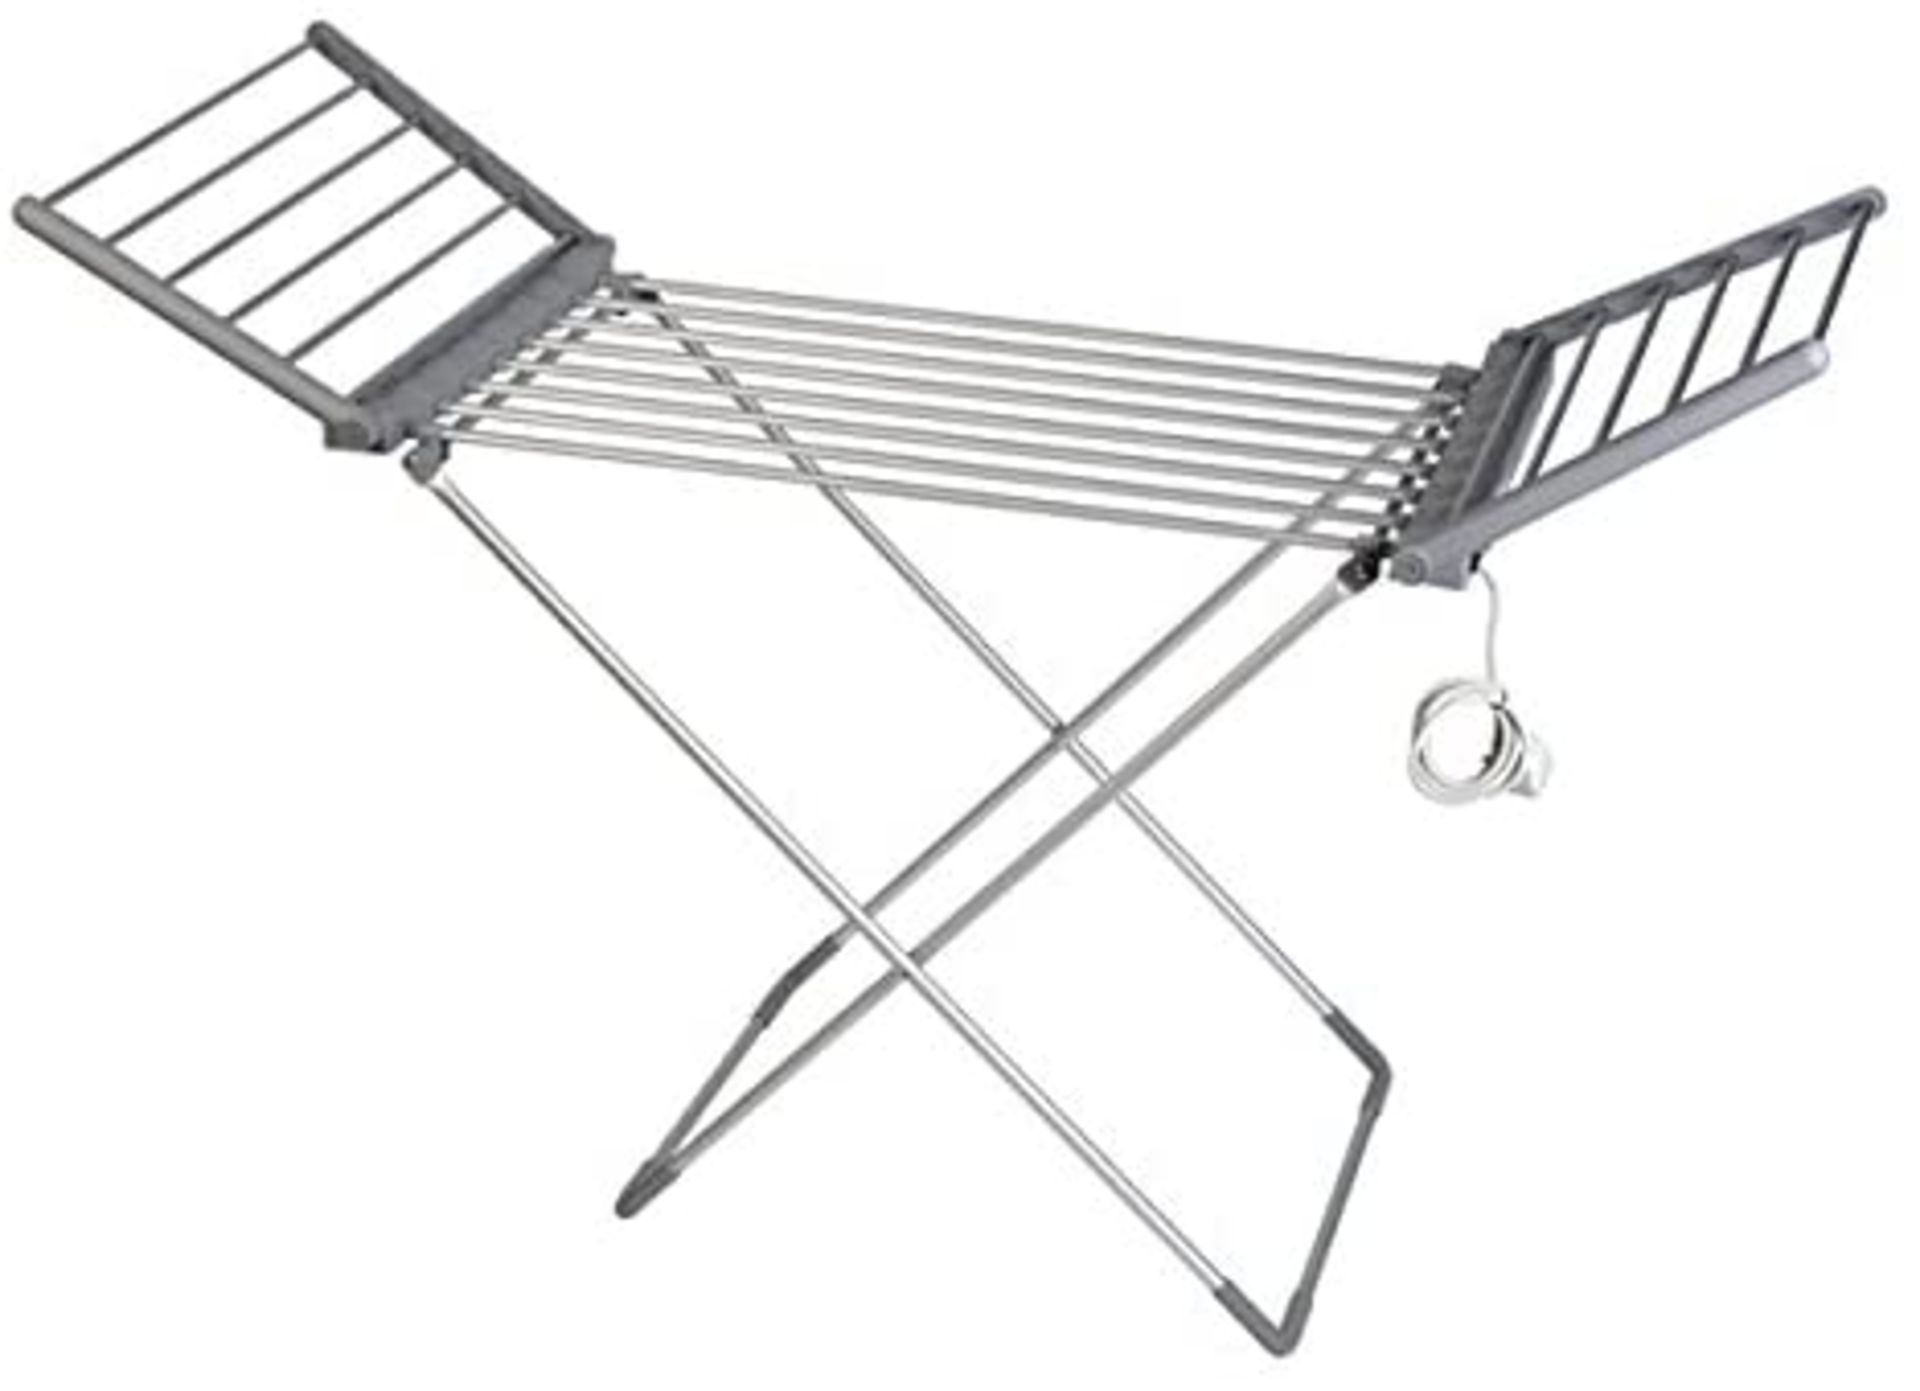 (T31) 1 x GRADE B - Beldray Electric Foldable Durable Clothes Airer, 12 m Drying Space, 230 W [...